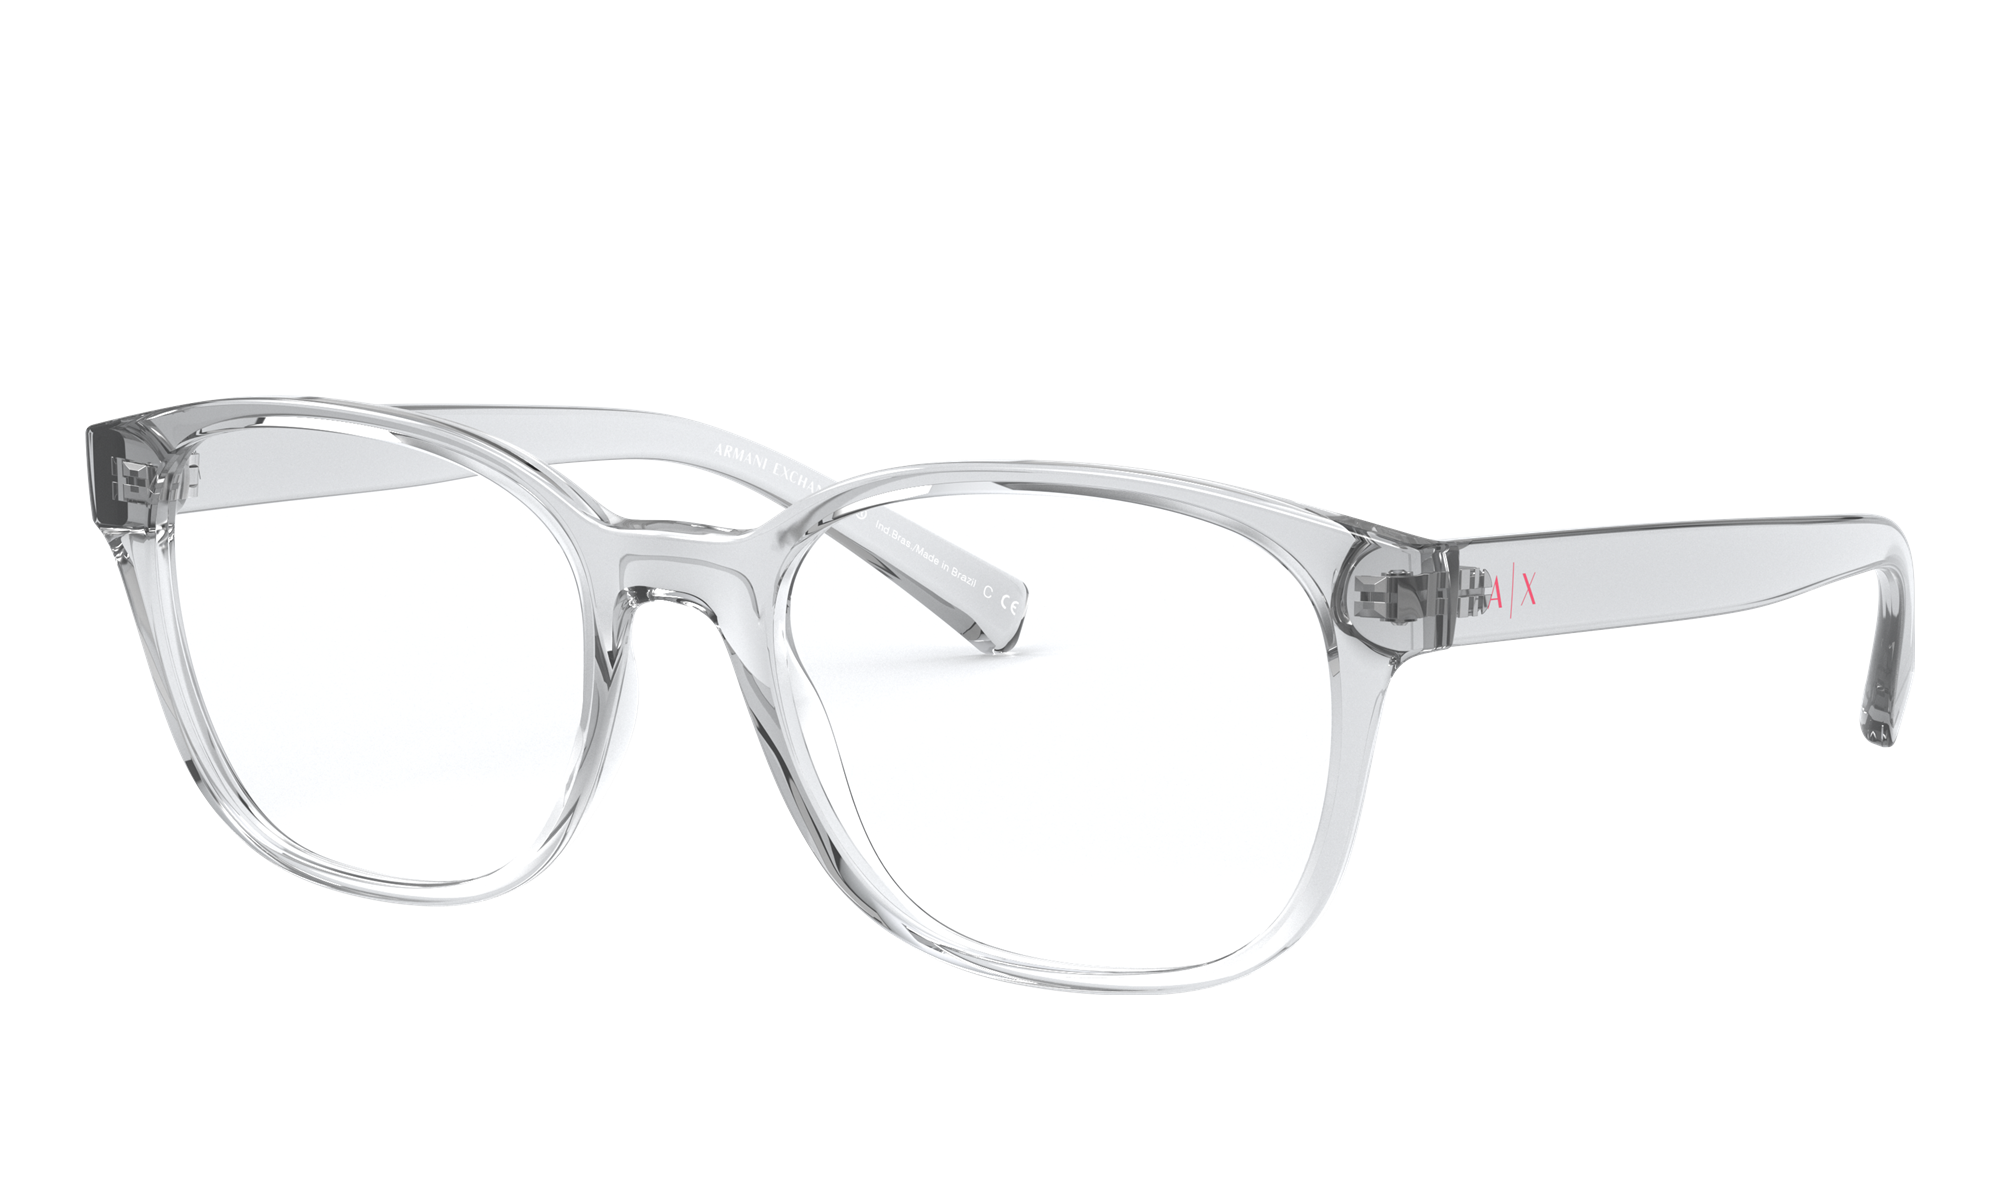 armani exchange glasses clear frames,Save up to 19%,